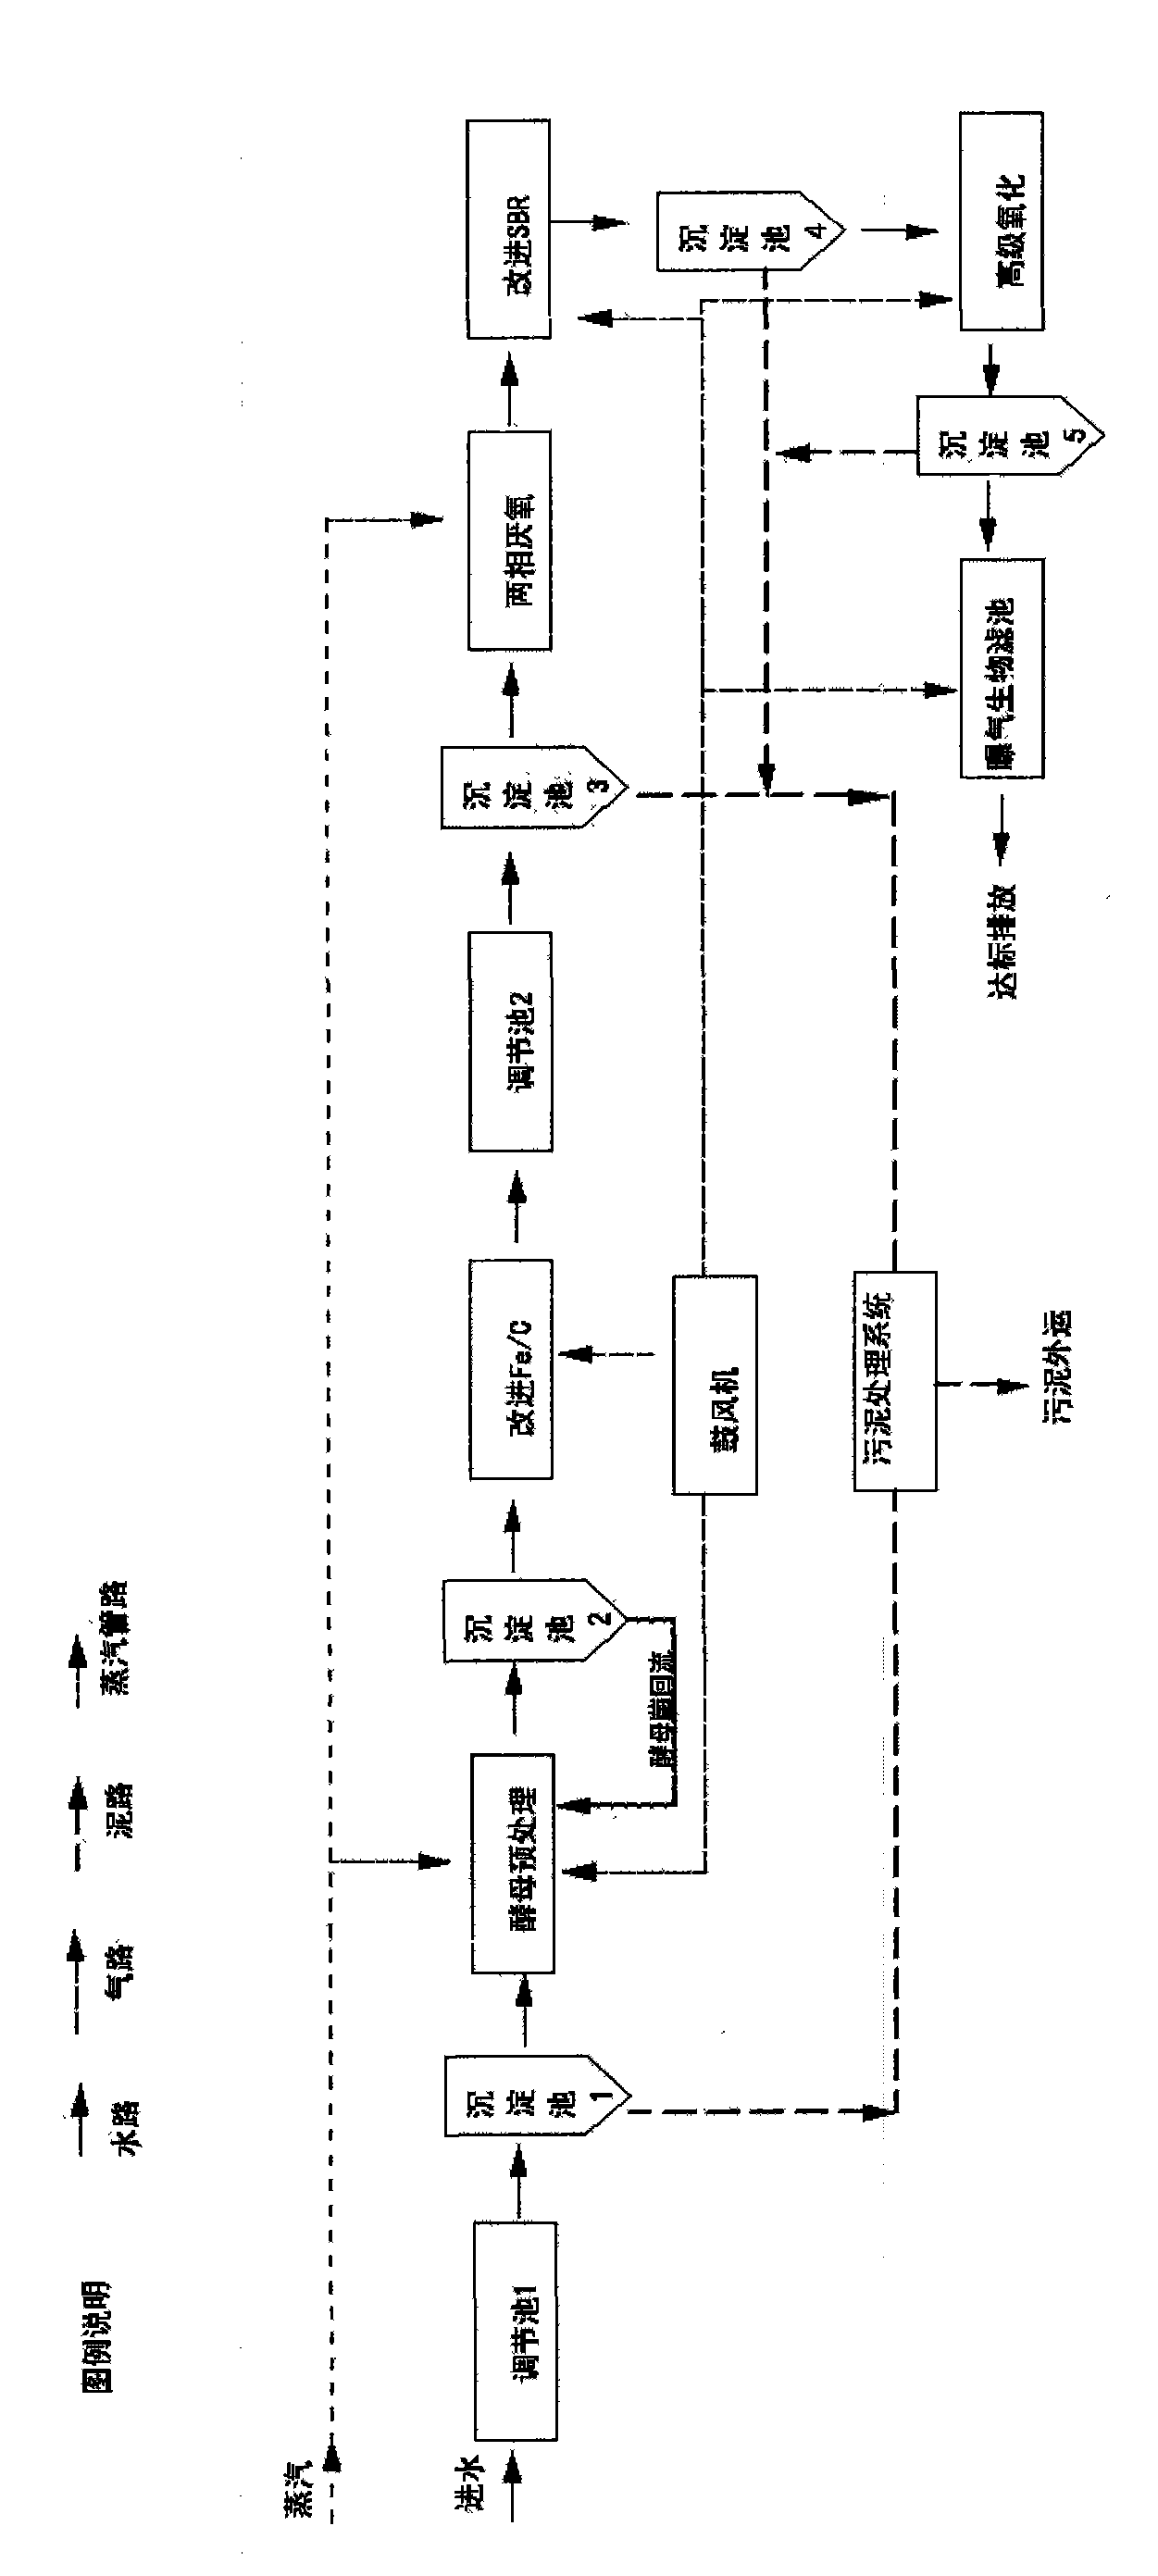 Method for treating erythromycin thiocyanate wastewater